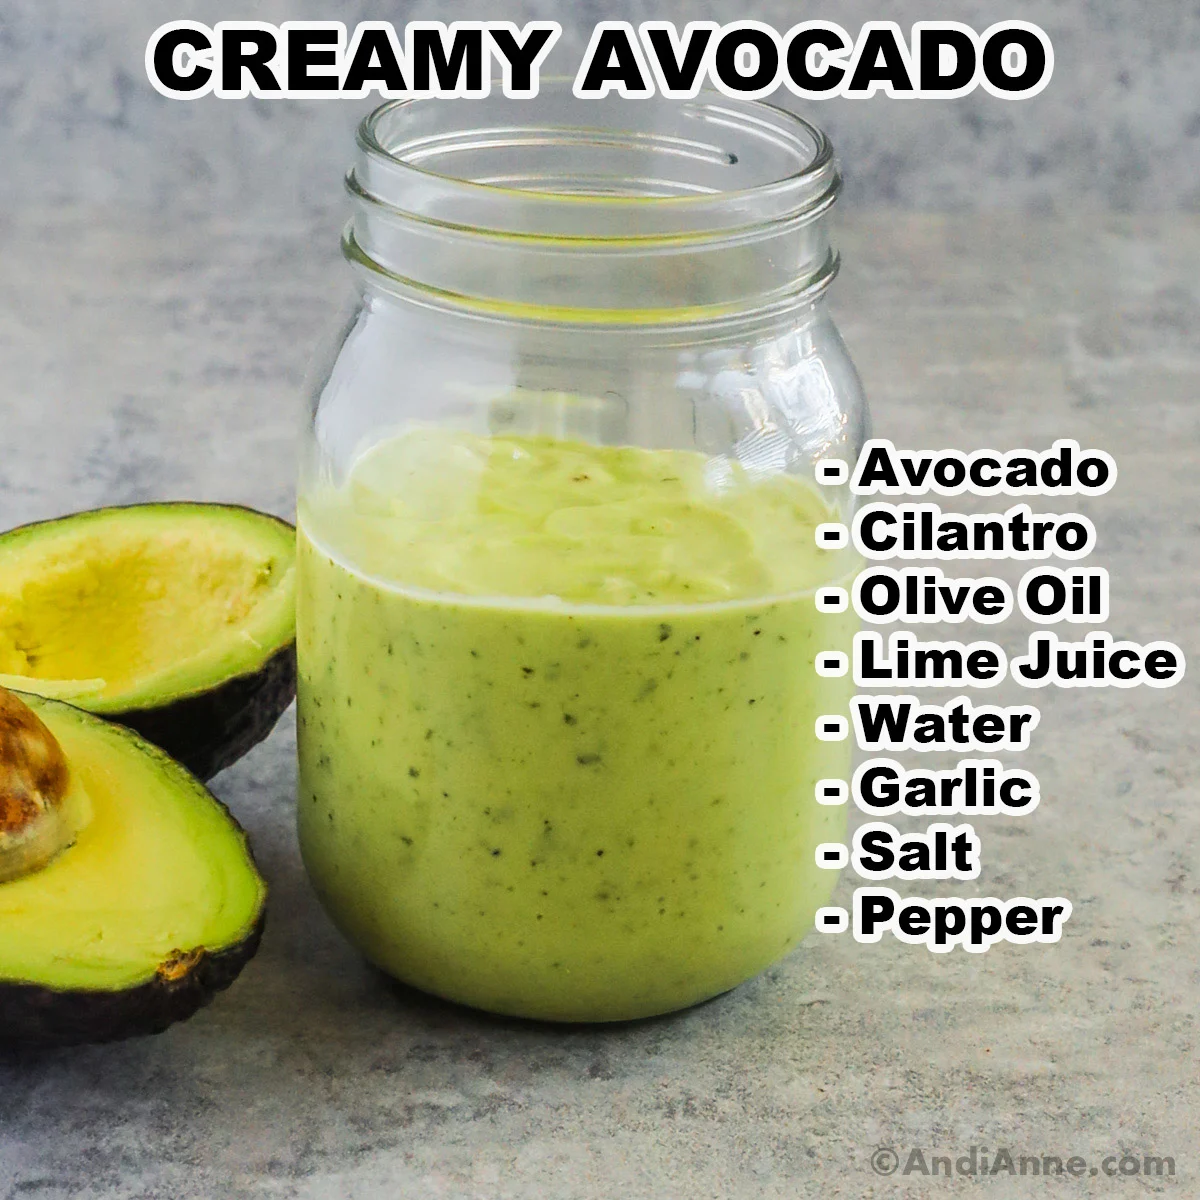 A jar of creamy avocado dressing with a sliced avocado beside it. Ingredients are listed beside include avocado, cilantro, olive oil, lime juice, water, garlic, salt and pepper.